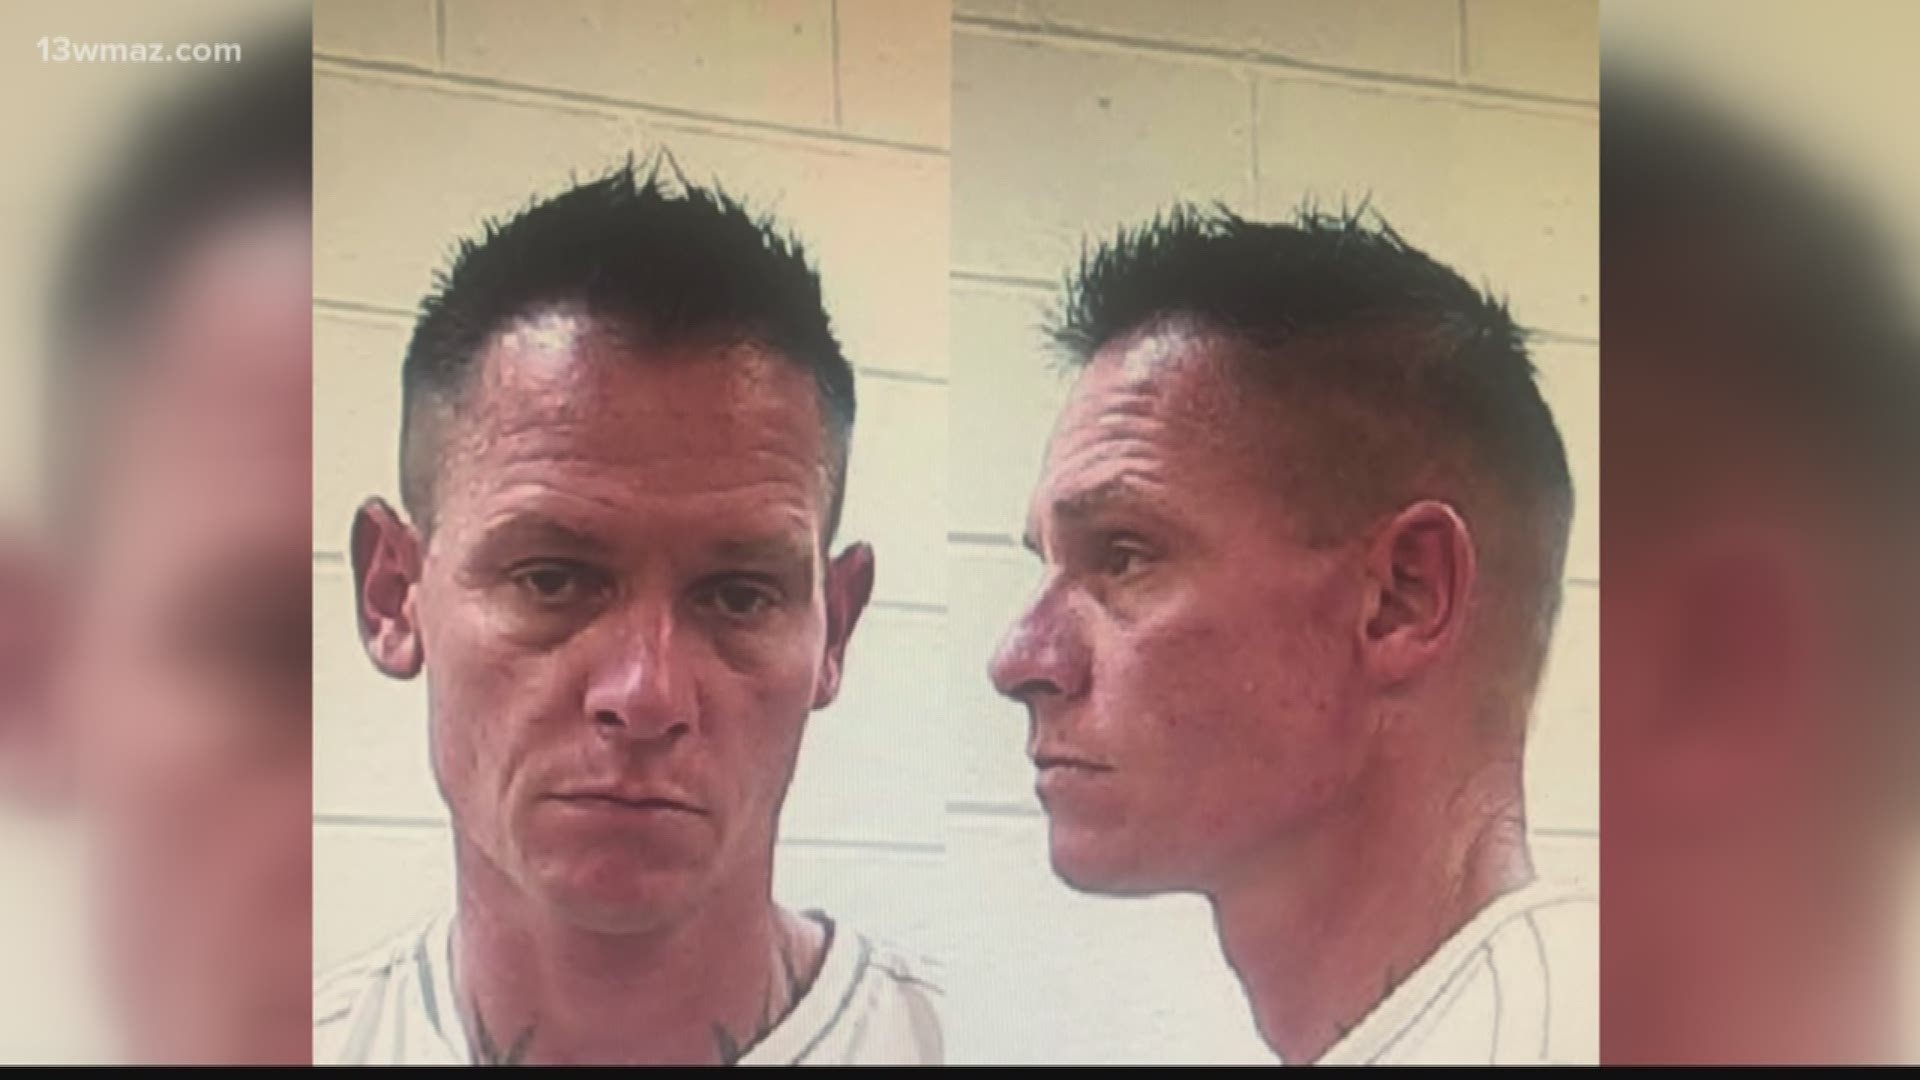 He's wanted in connection with several incidents of family violence, according to the Perry Police Department